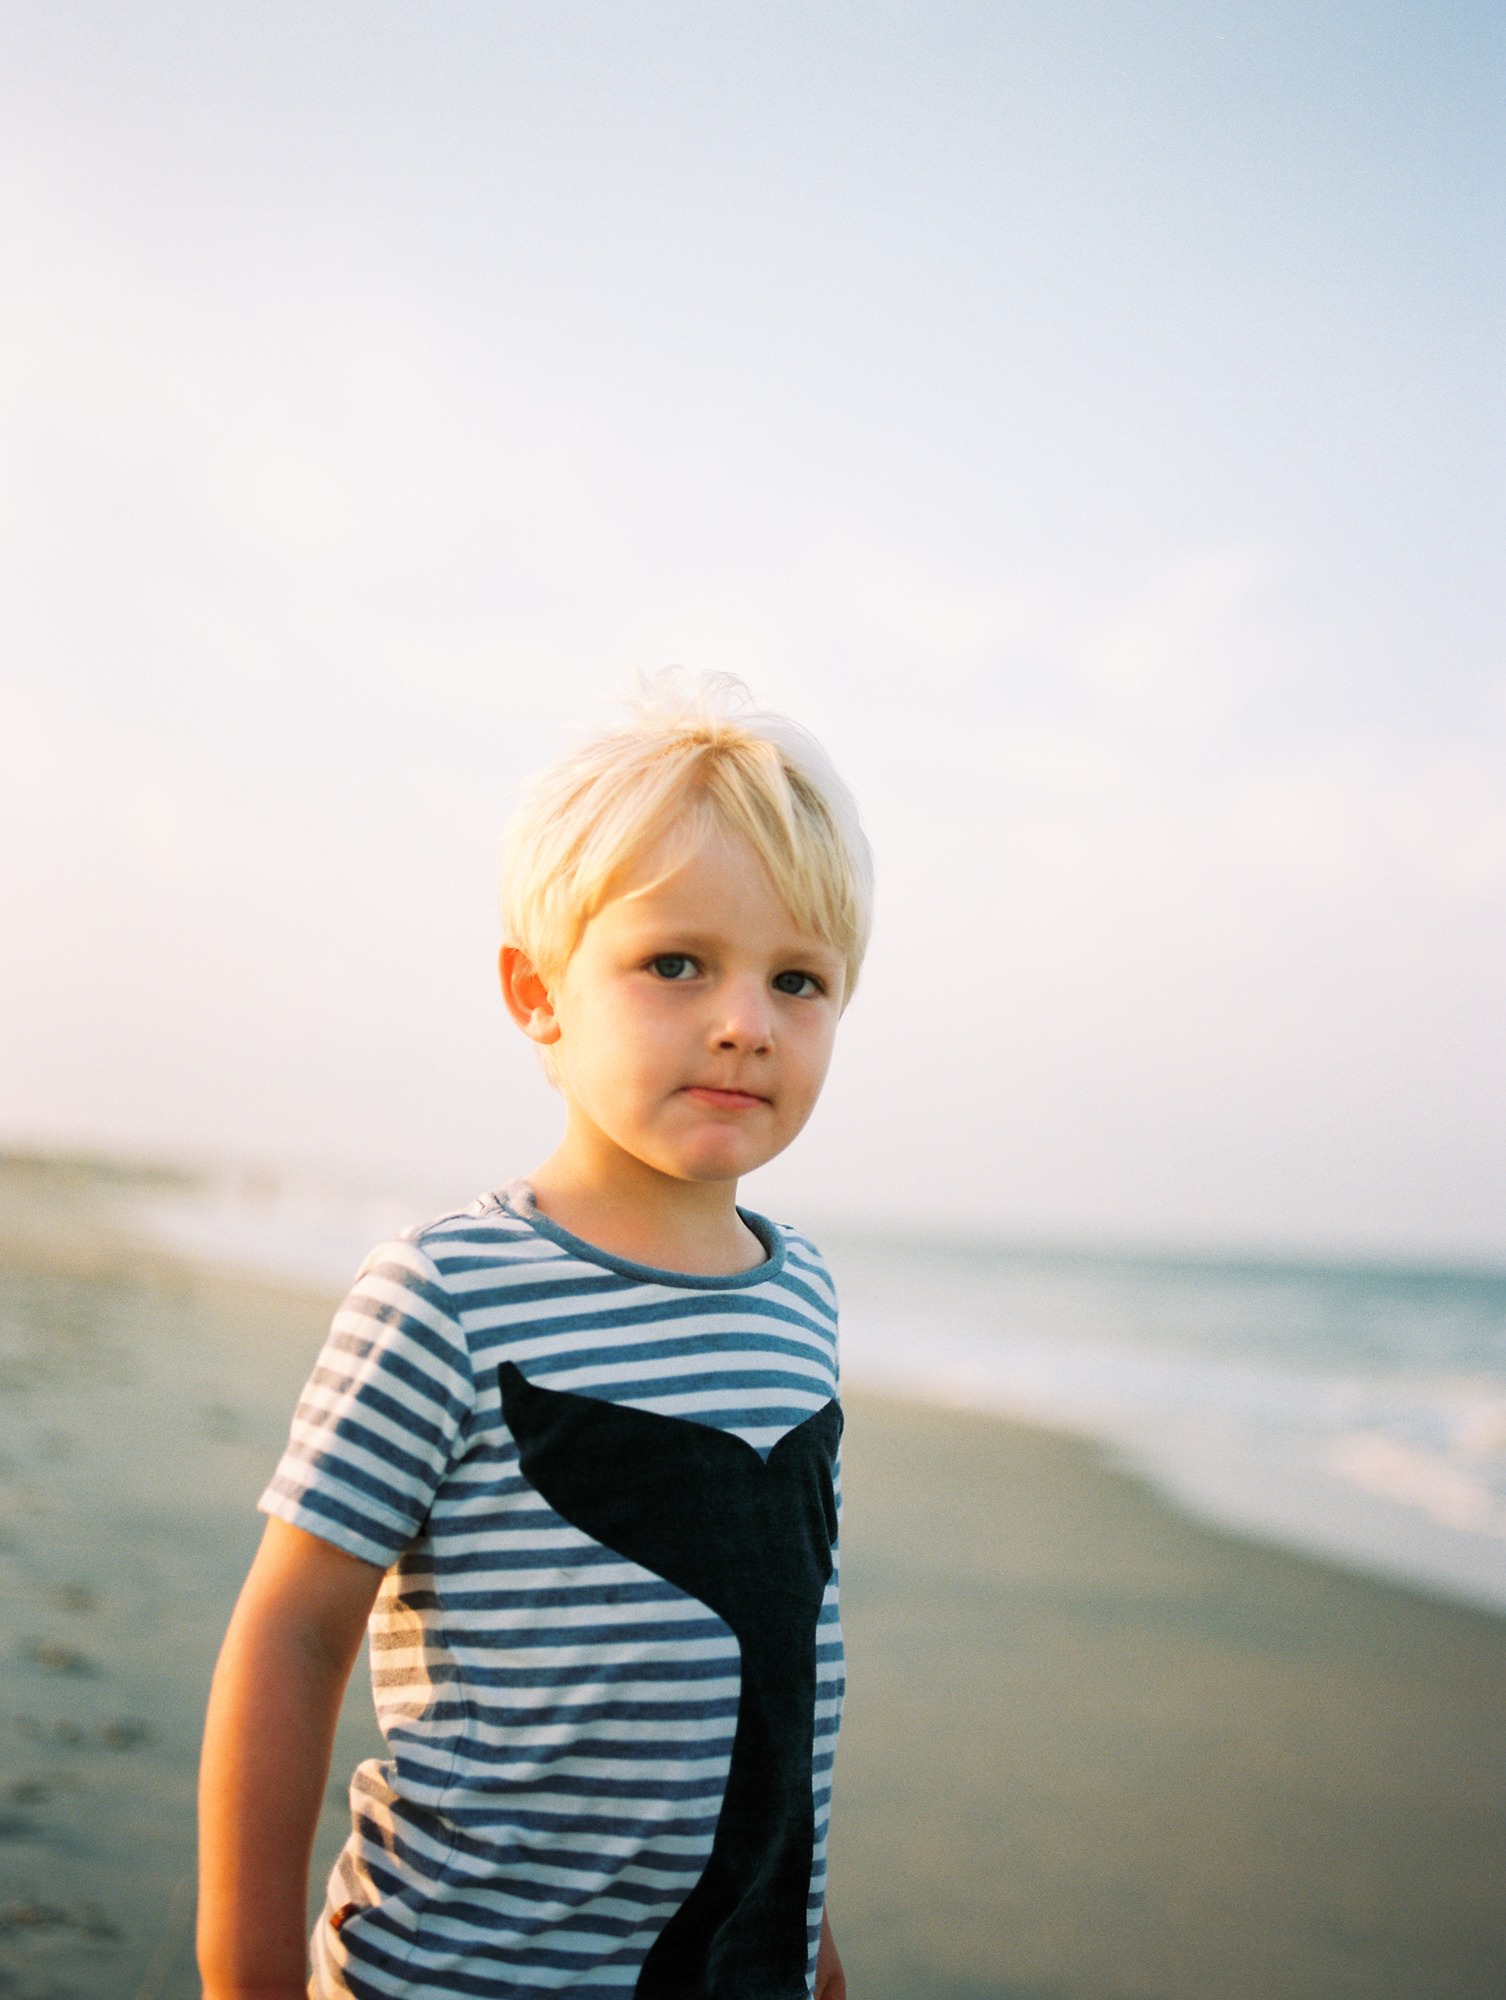 dusk photo of a young blonde boy at the beach